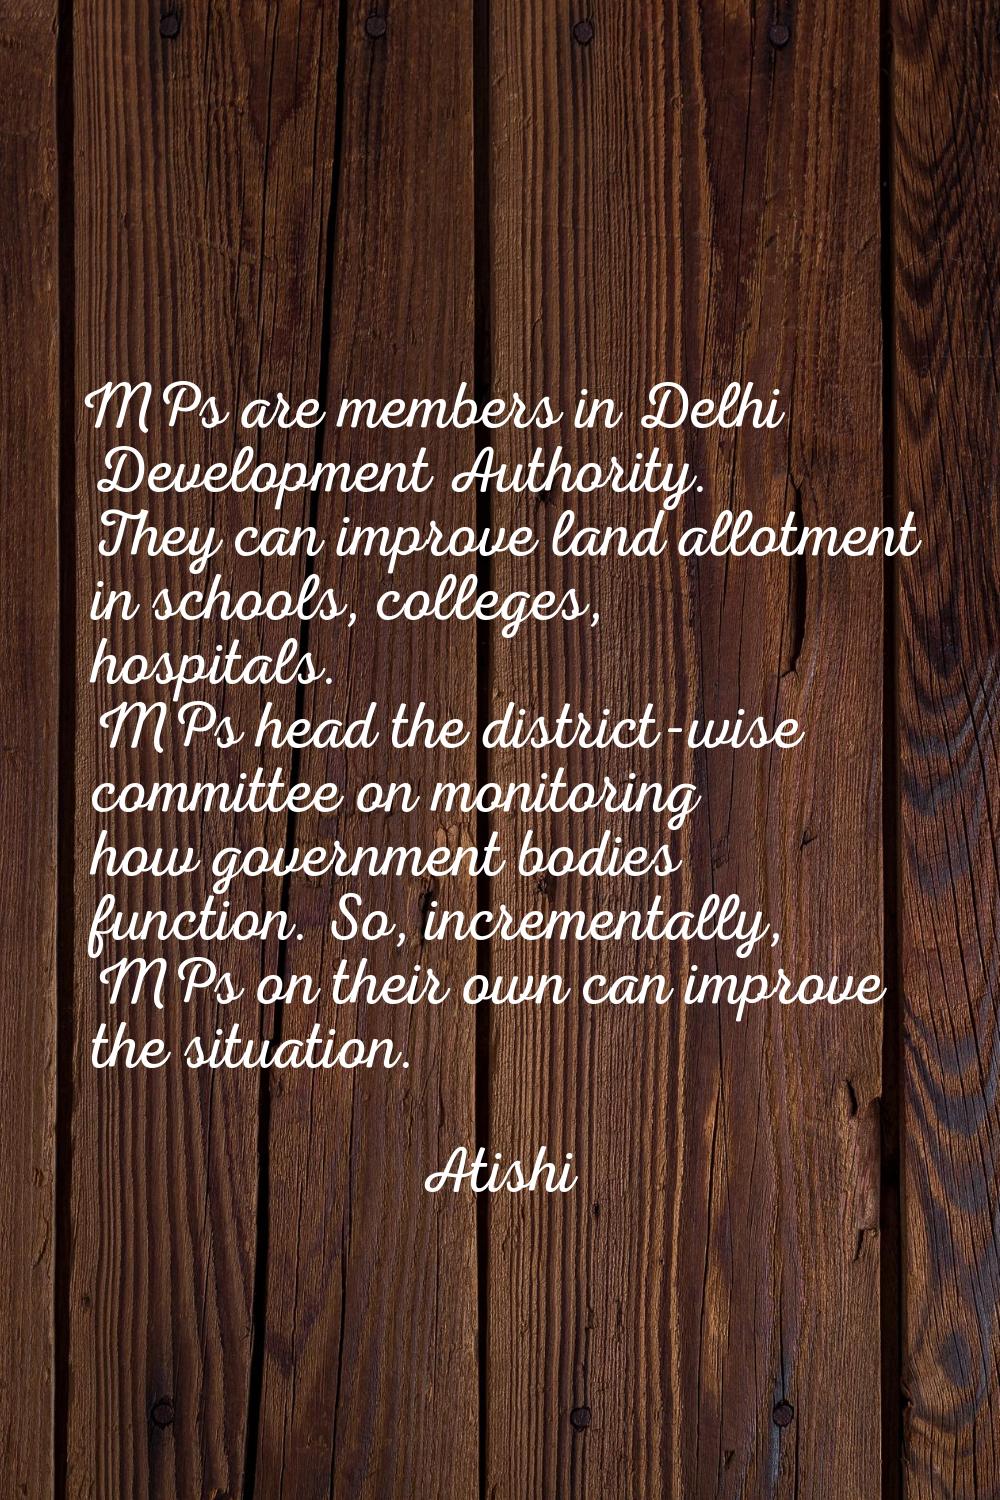 MPs are members in Delhi Development Authority. They can improve land allotment in schools, college